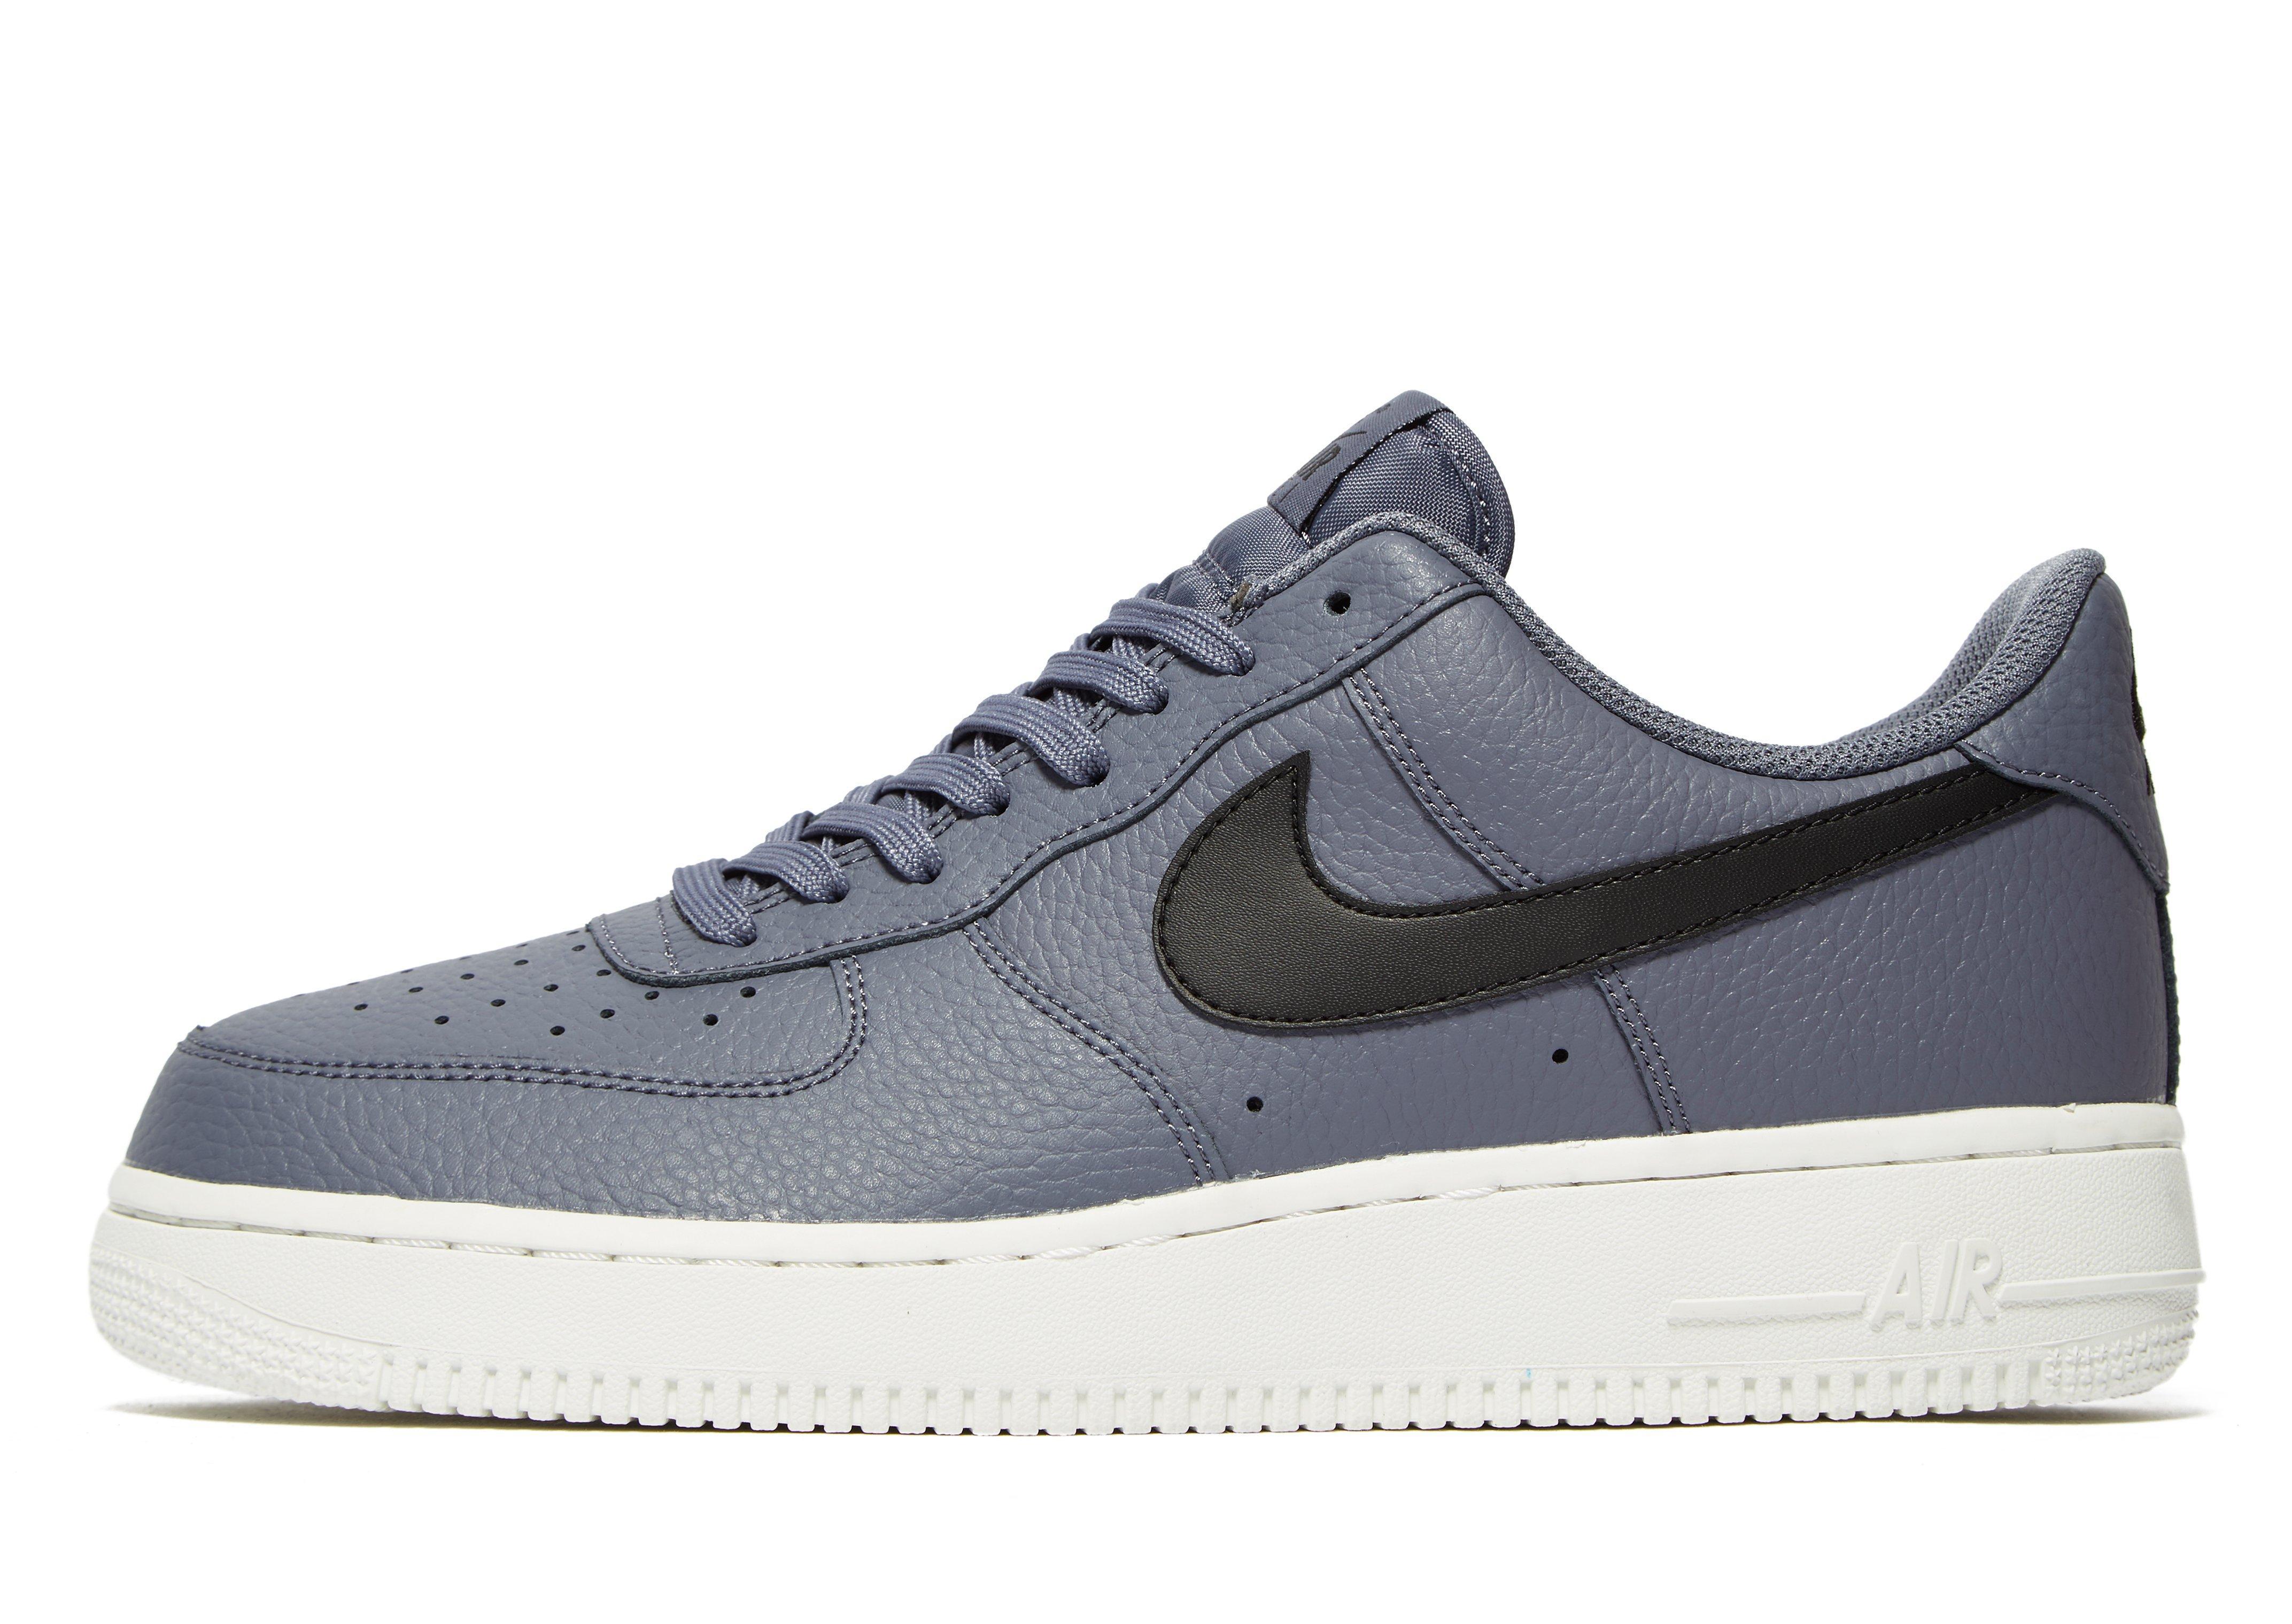 Nike Leather Air Force 1 Low in Carbon/Black (Black) for Men - Lyst